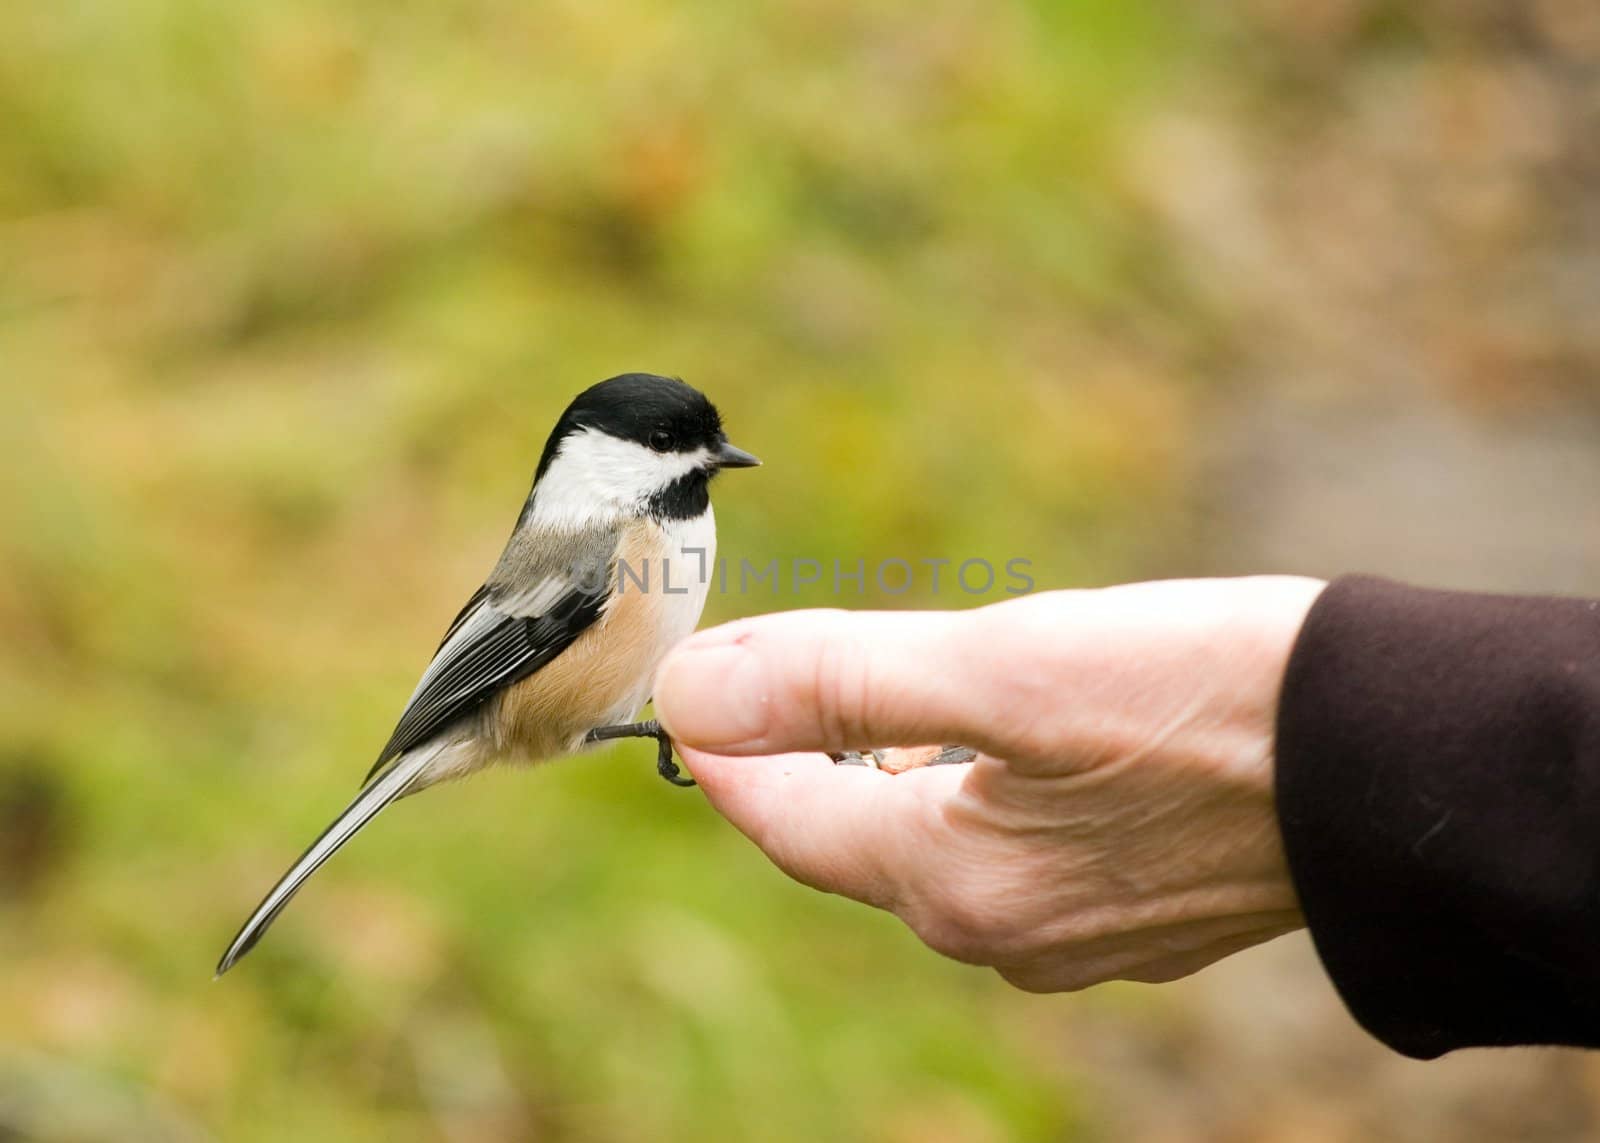 Chickadee In Hand by brm1949